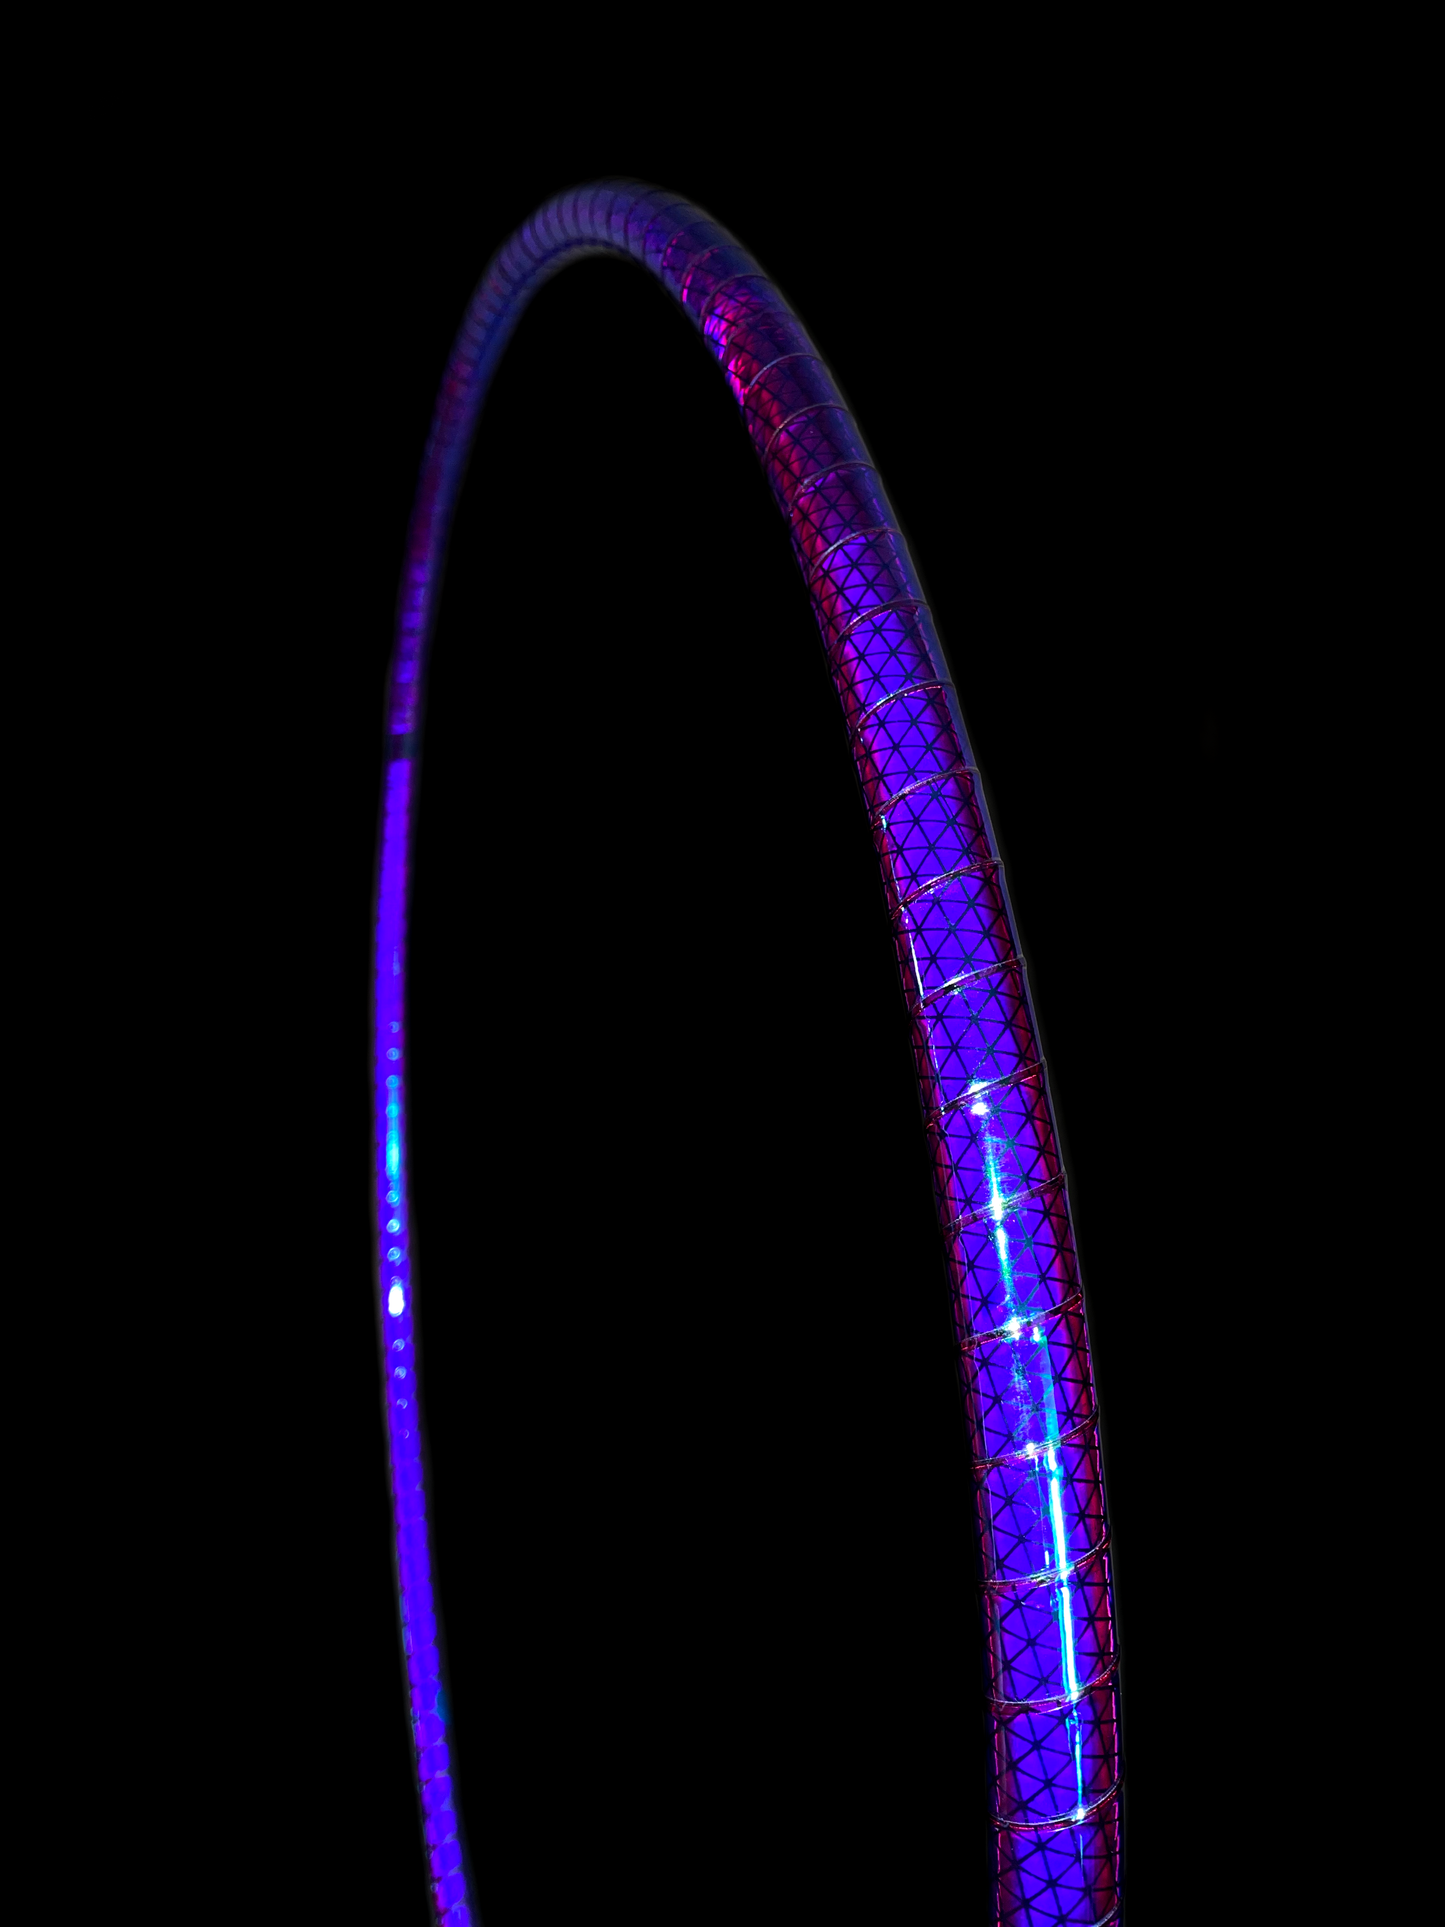 Blue Rubellite Color-Shift Reflective Taped Hoops